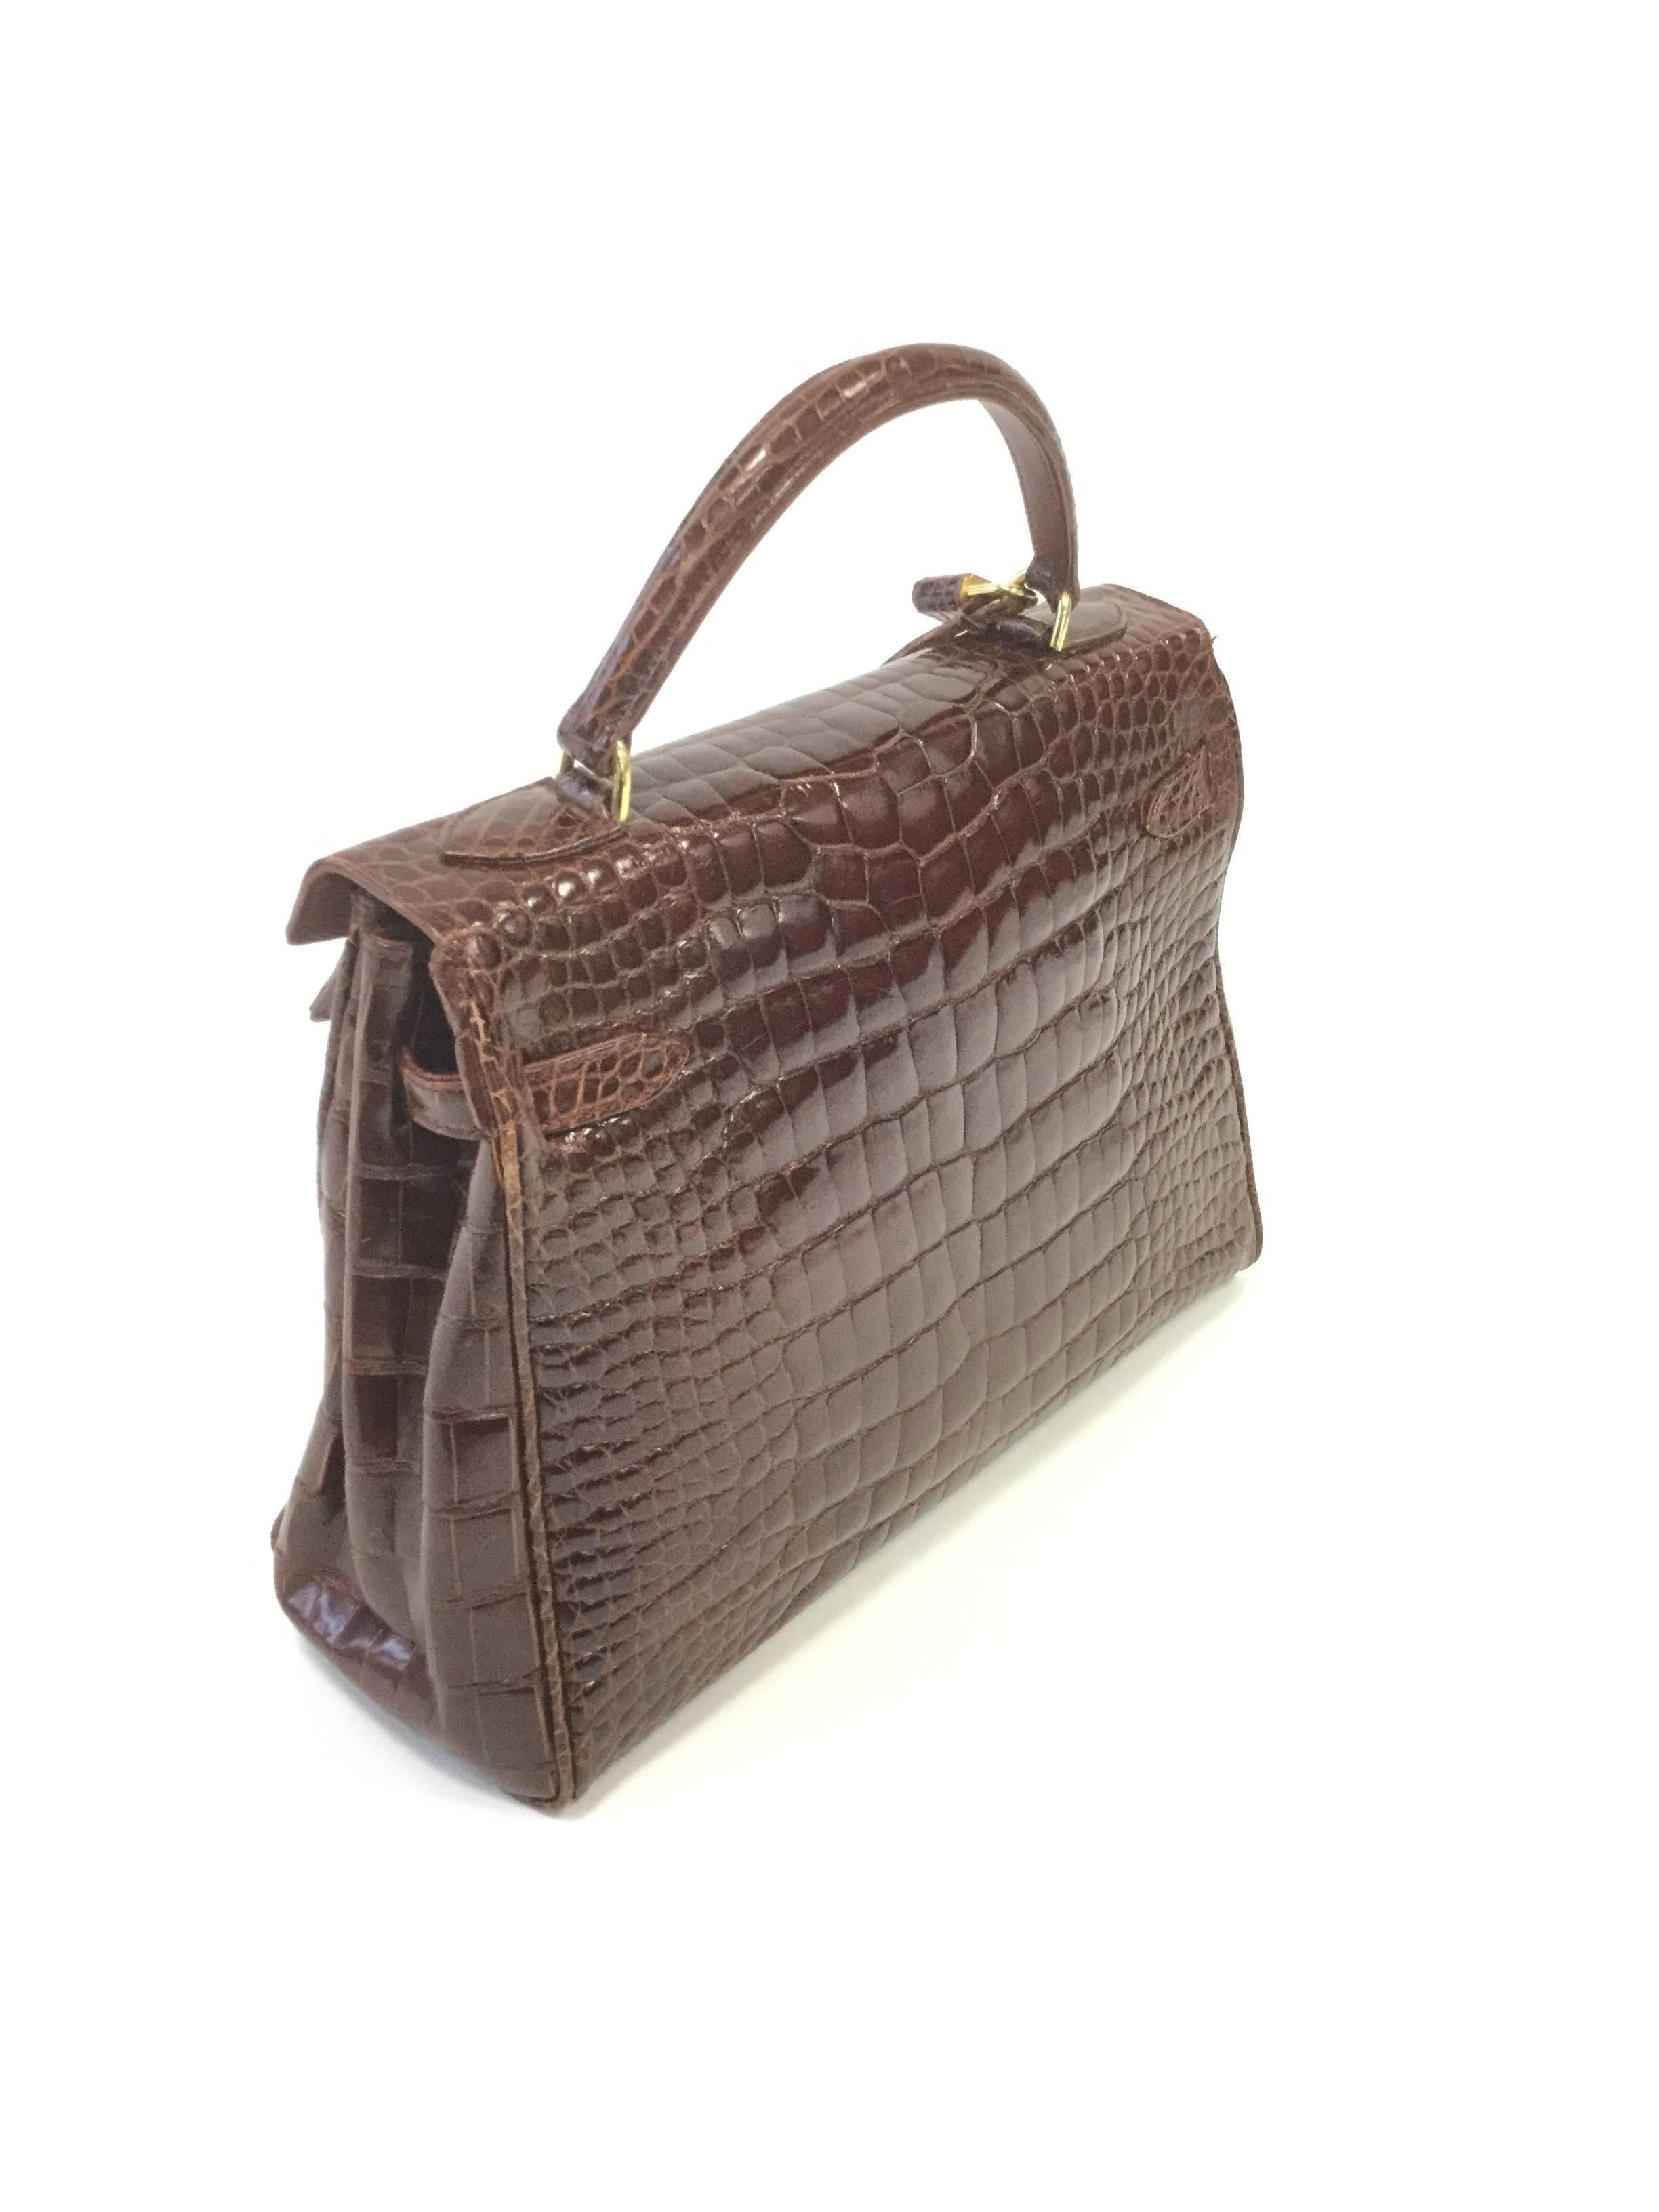 
This gorgeous chocolate brown alligator skin handbag by Revillon is an absolute dream! The purse is composed of a rectangular body with accordion side folds kept in place by two leather straps that meet in the middle and loop through the locking